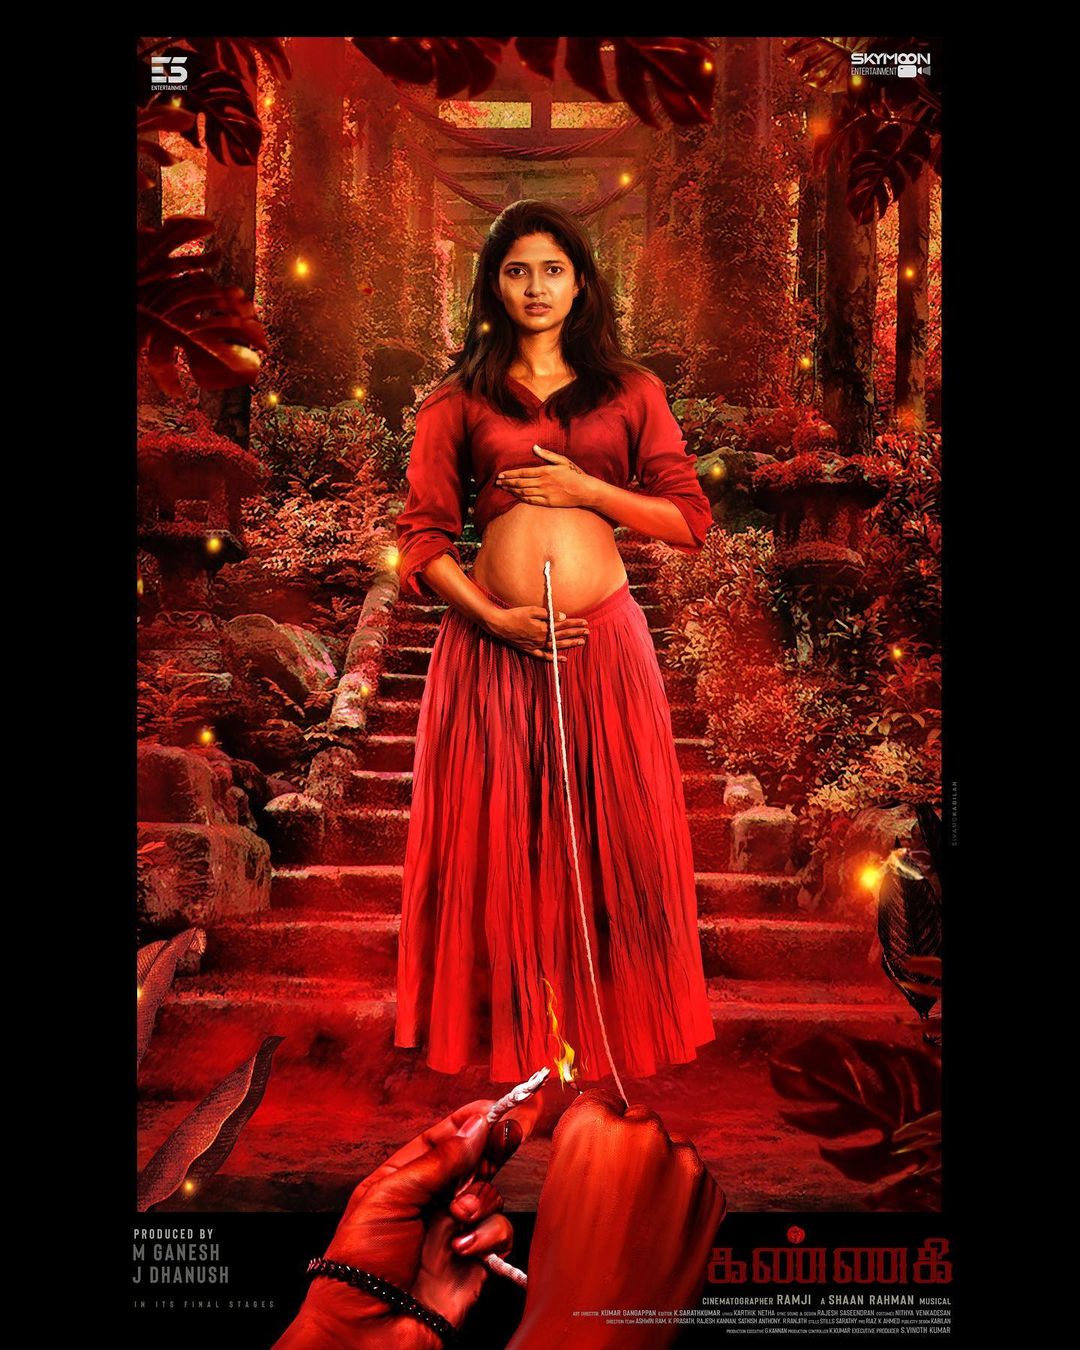 Keerthi Pandian's new movie as a pregnant girl shocking first look poster out